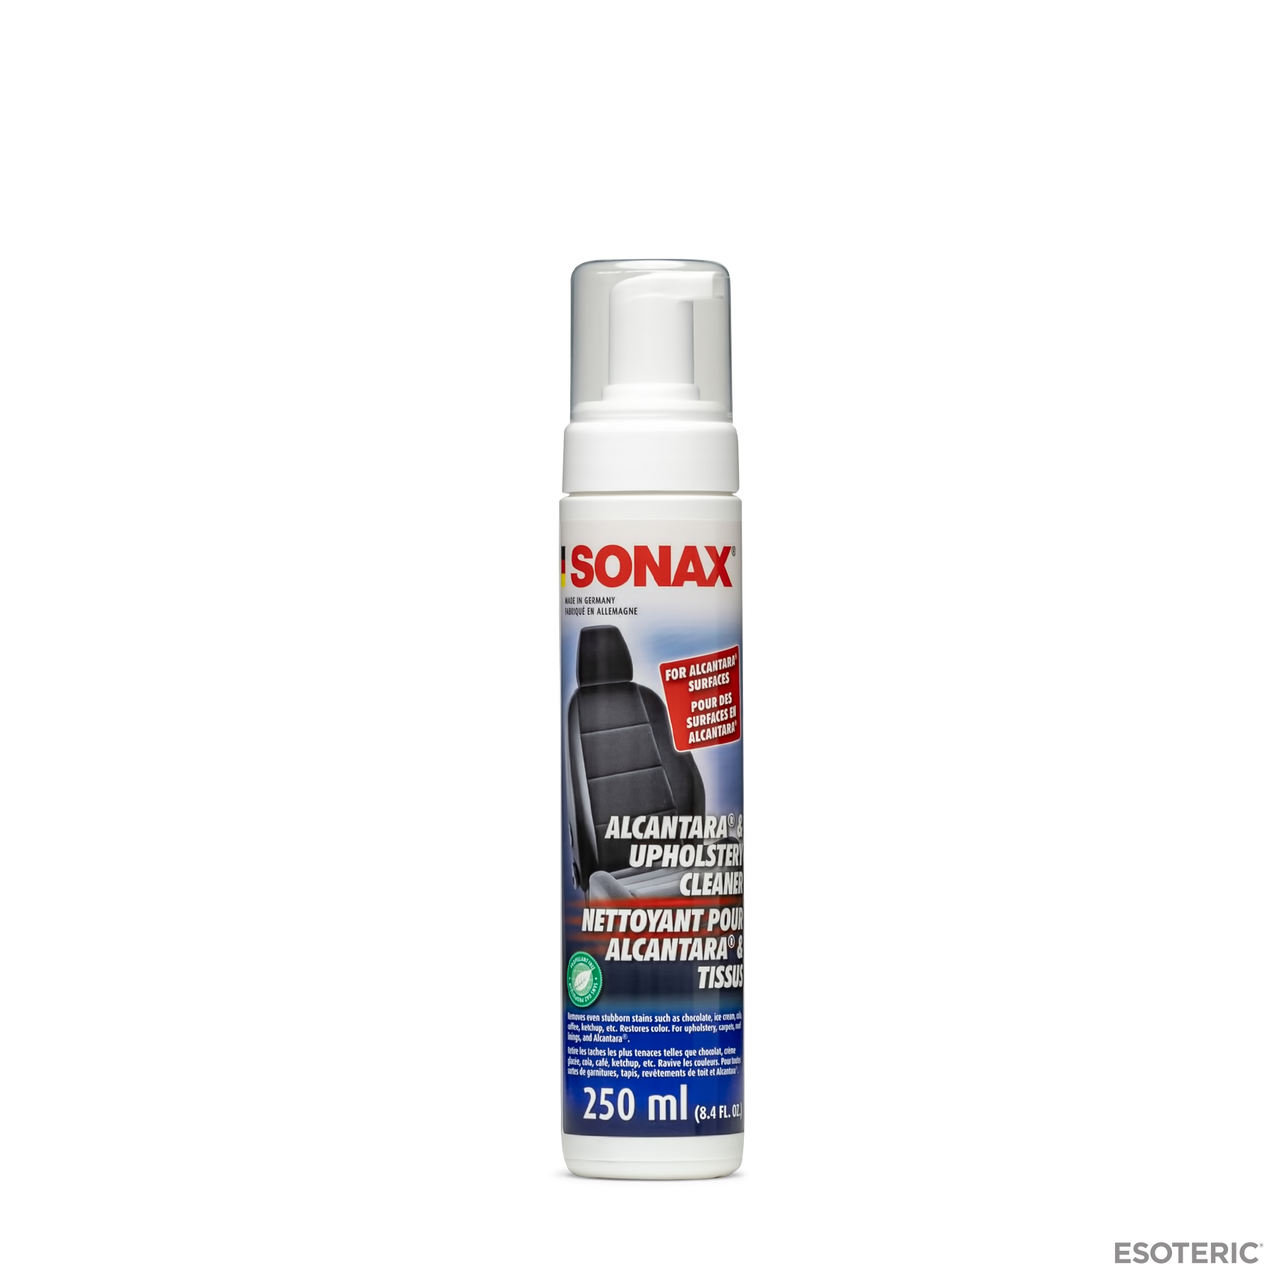 SONAX Upholstery & Carpet Cleaner